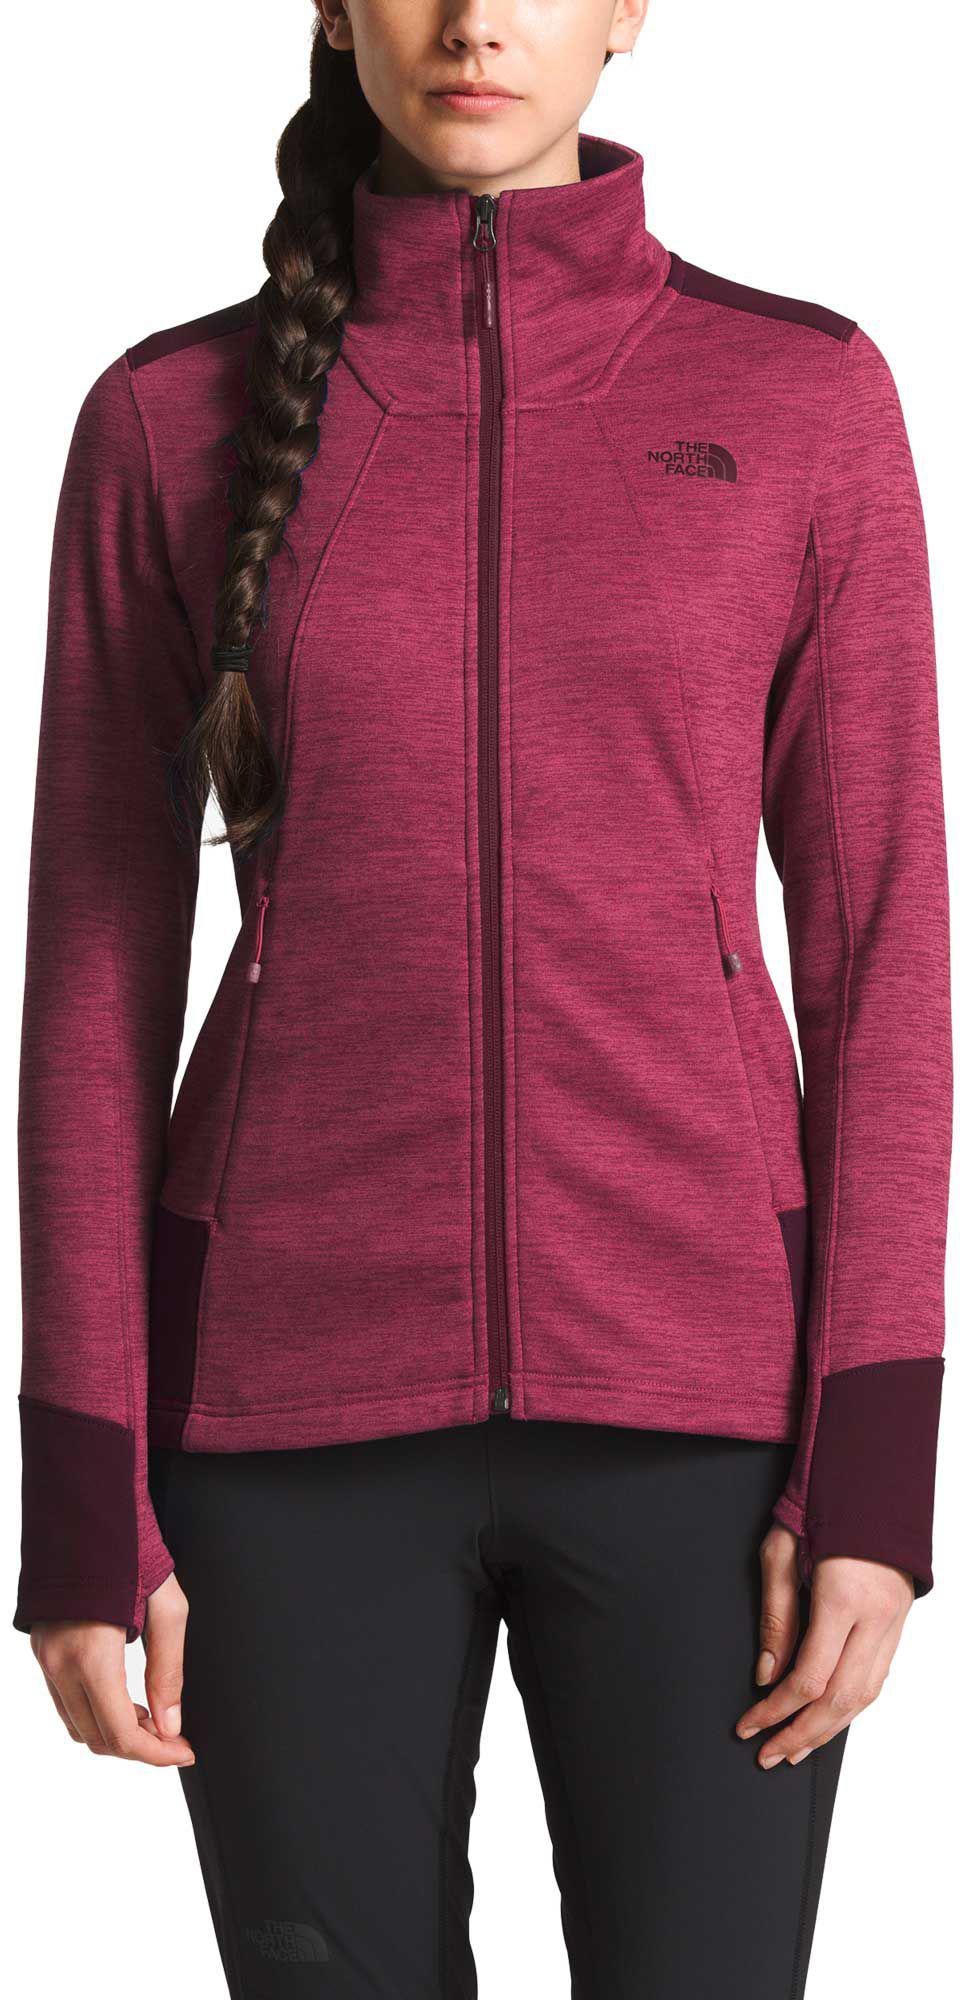 The North Face Shastina Stretch Full Zip Fleece Jacket in Red - Lyst